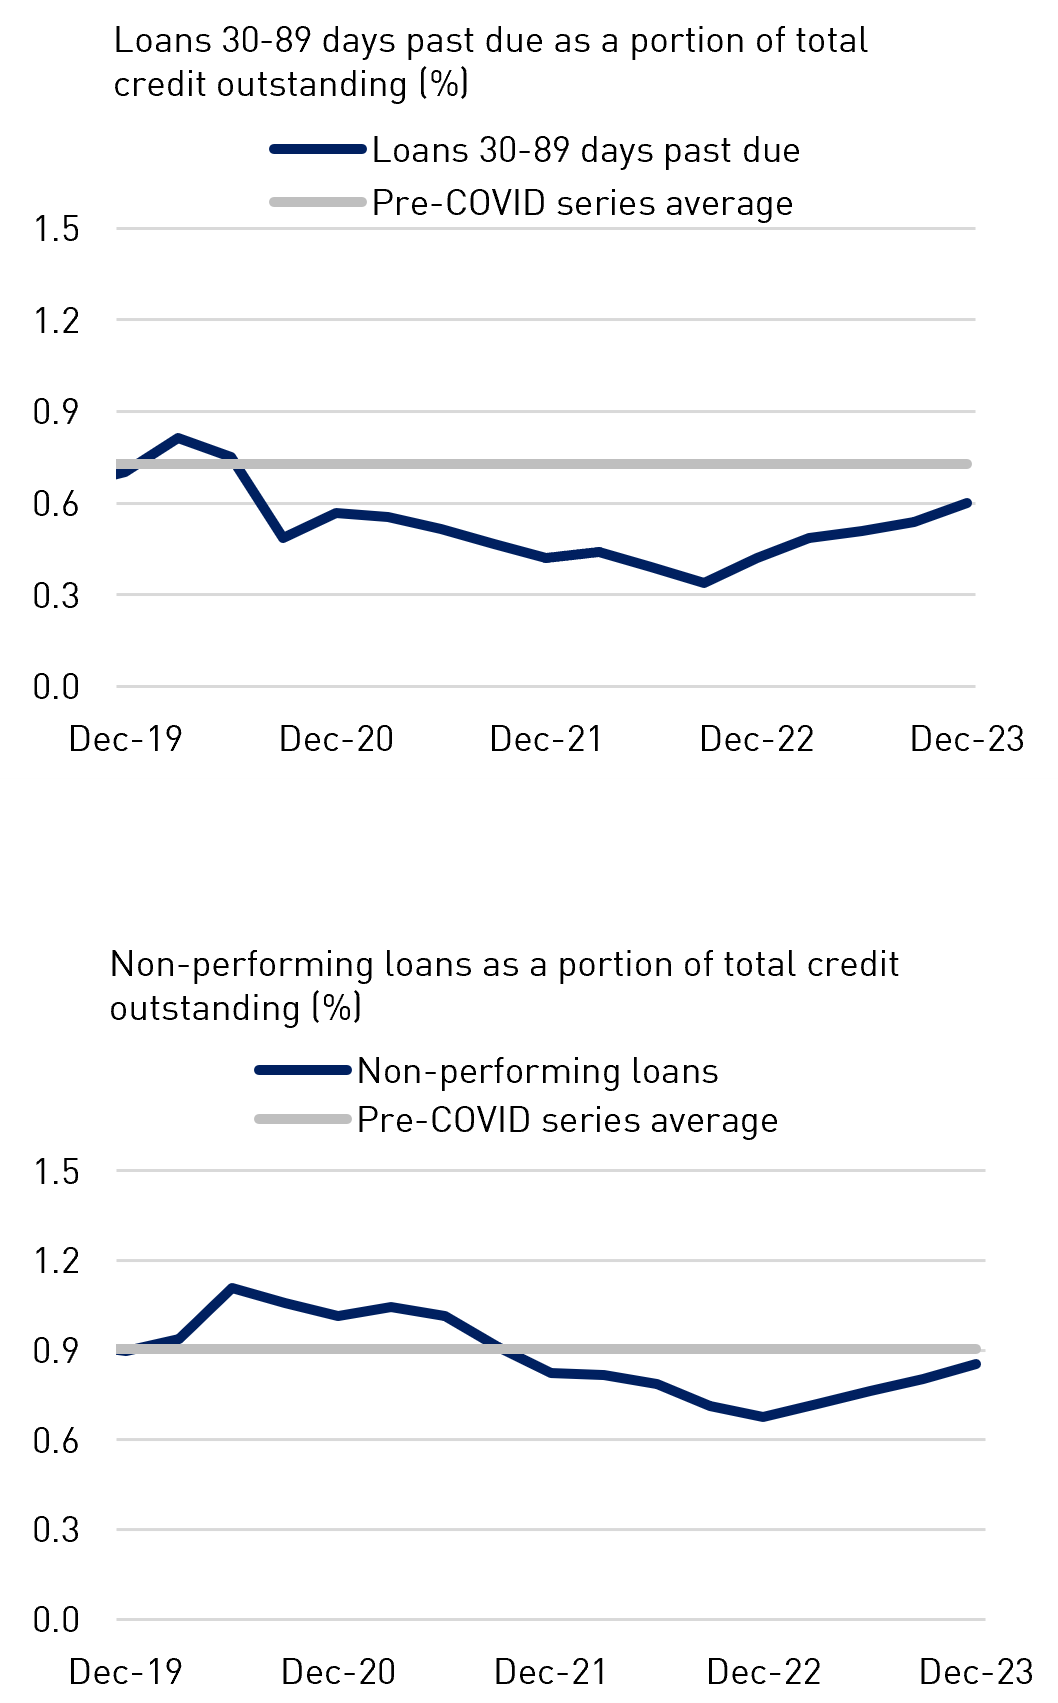 Loans 30-89 days past due as a portion of total credit outstanding (%) and Non-performing loans as a portion of total credit outstanding (%)